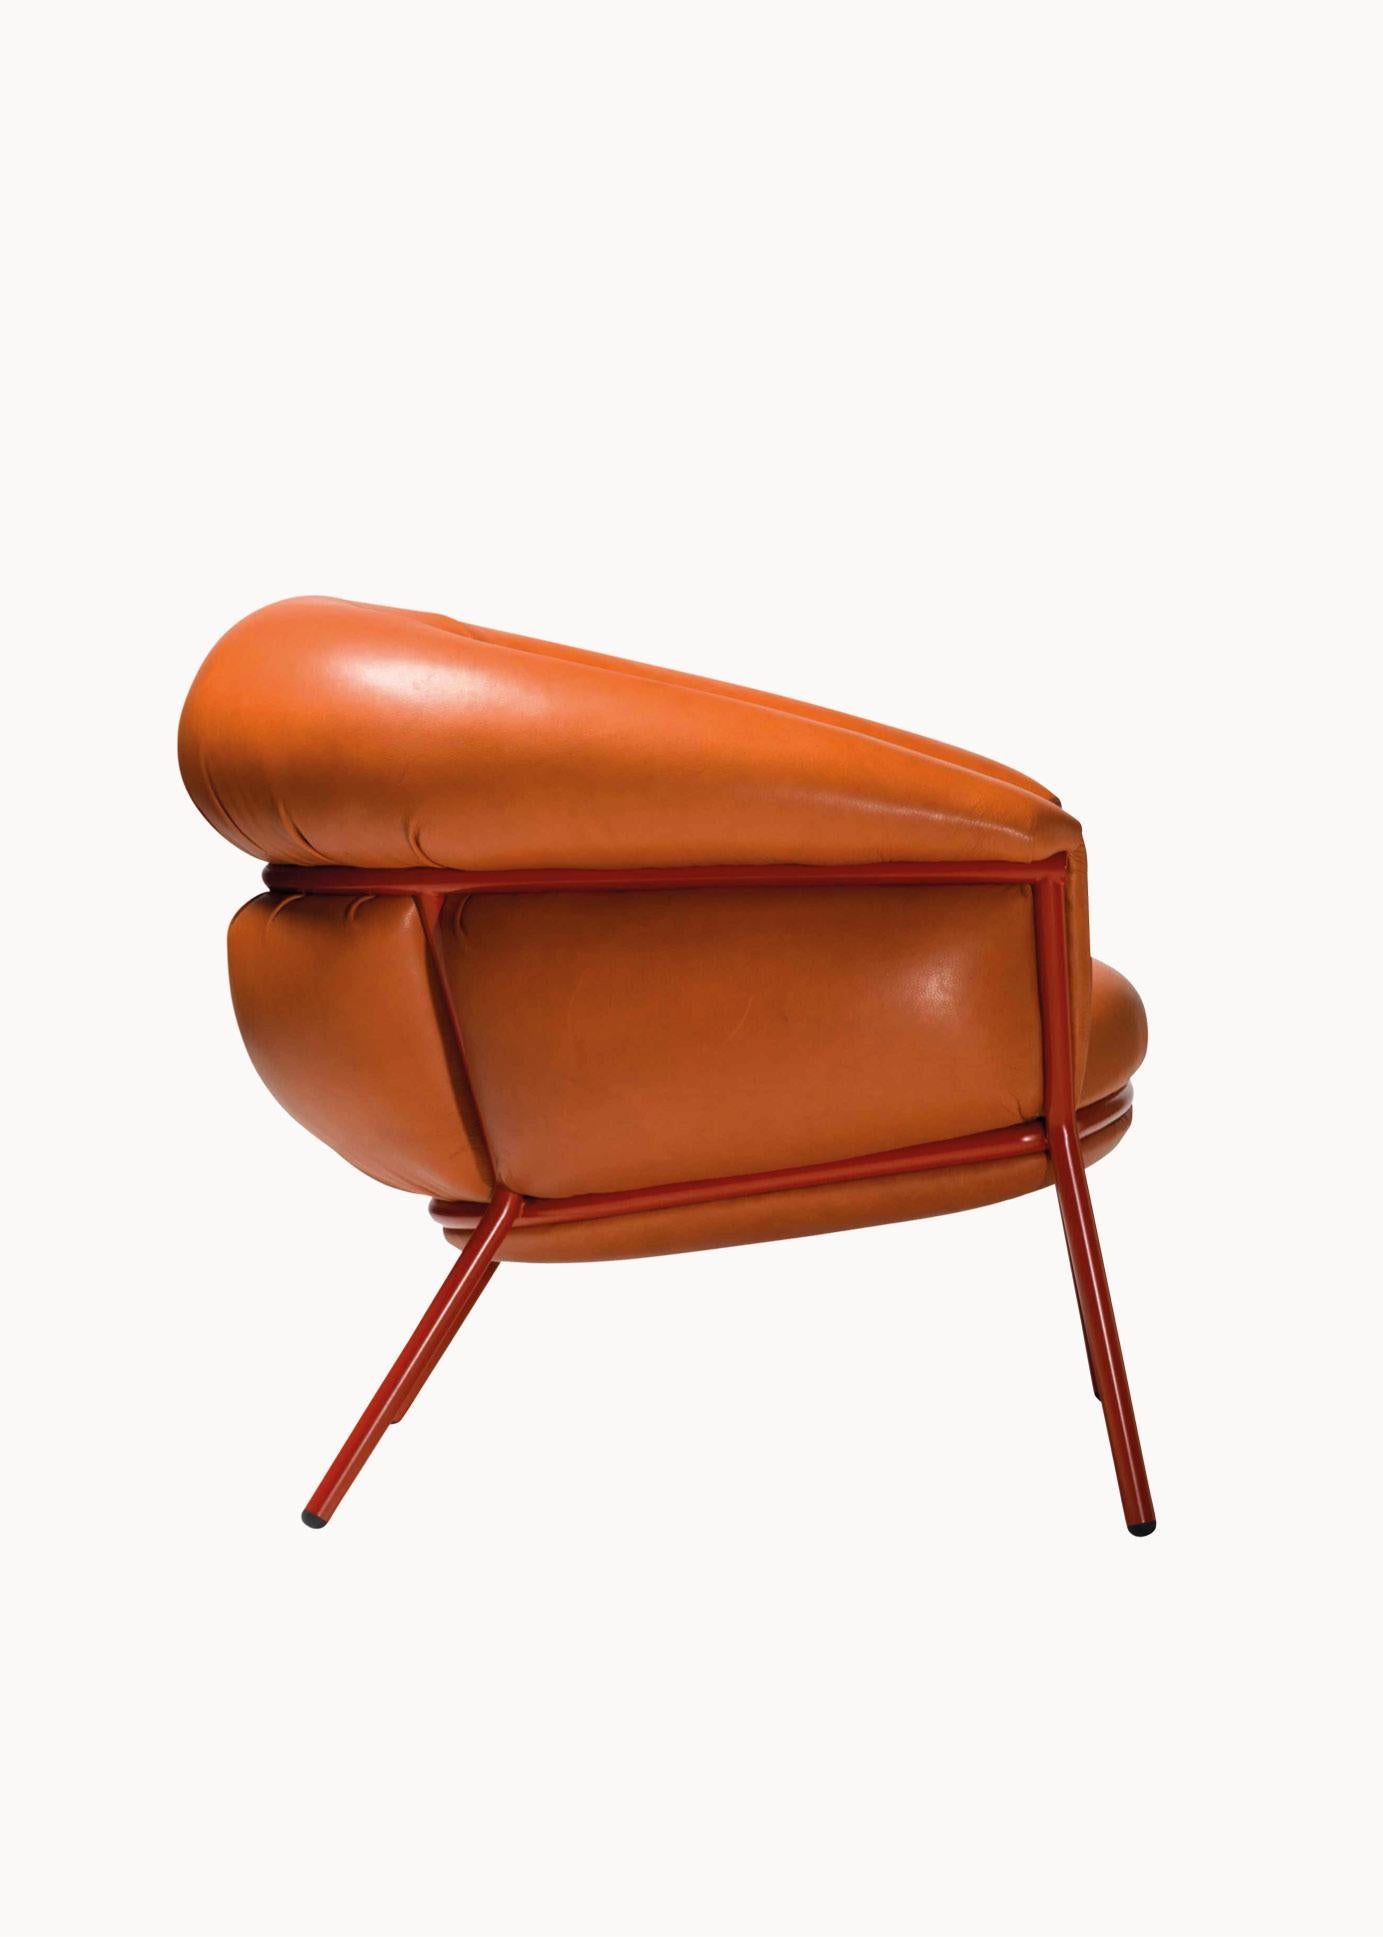 Contemporary Grasso armchair + footstool by Stephen Burks organge leather red metal structure For Sale